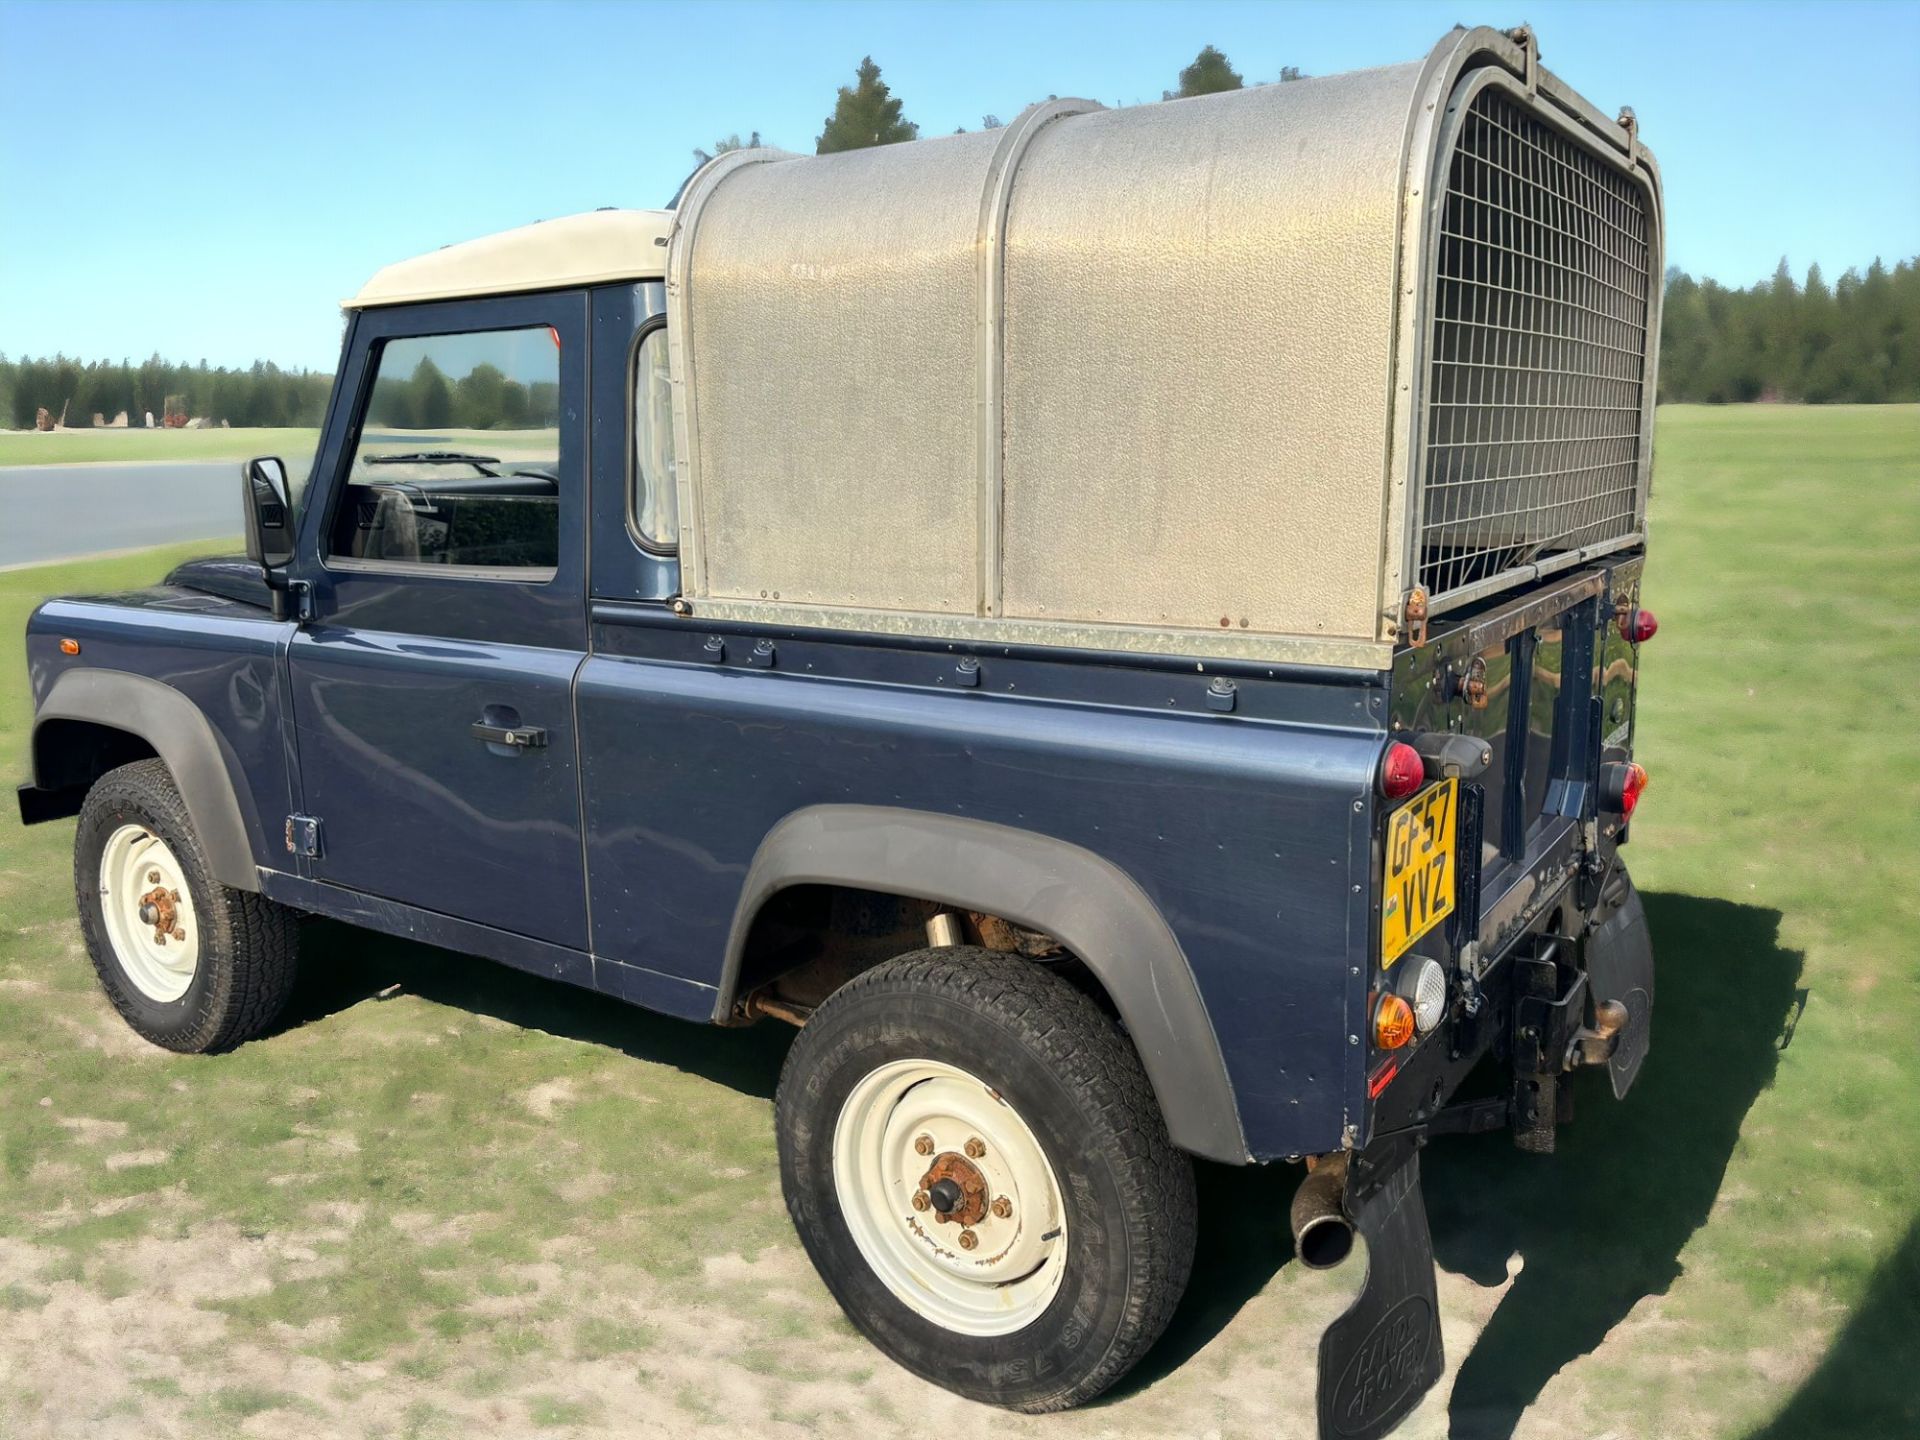 UNLEASH YOUR ADVENTUROUS SPIRIT WITH THE 2008 LAND ROVER DEFENDER 90 TRUCK TDCI - Image 8 of 15